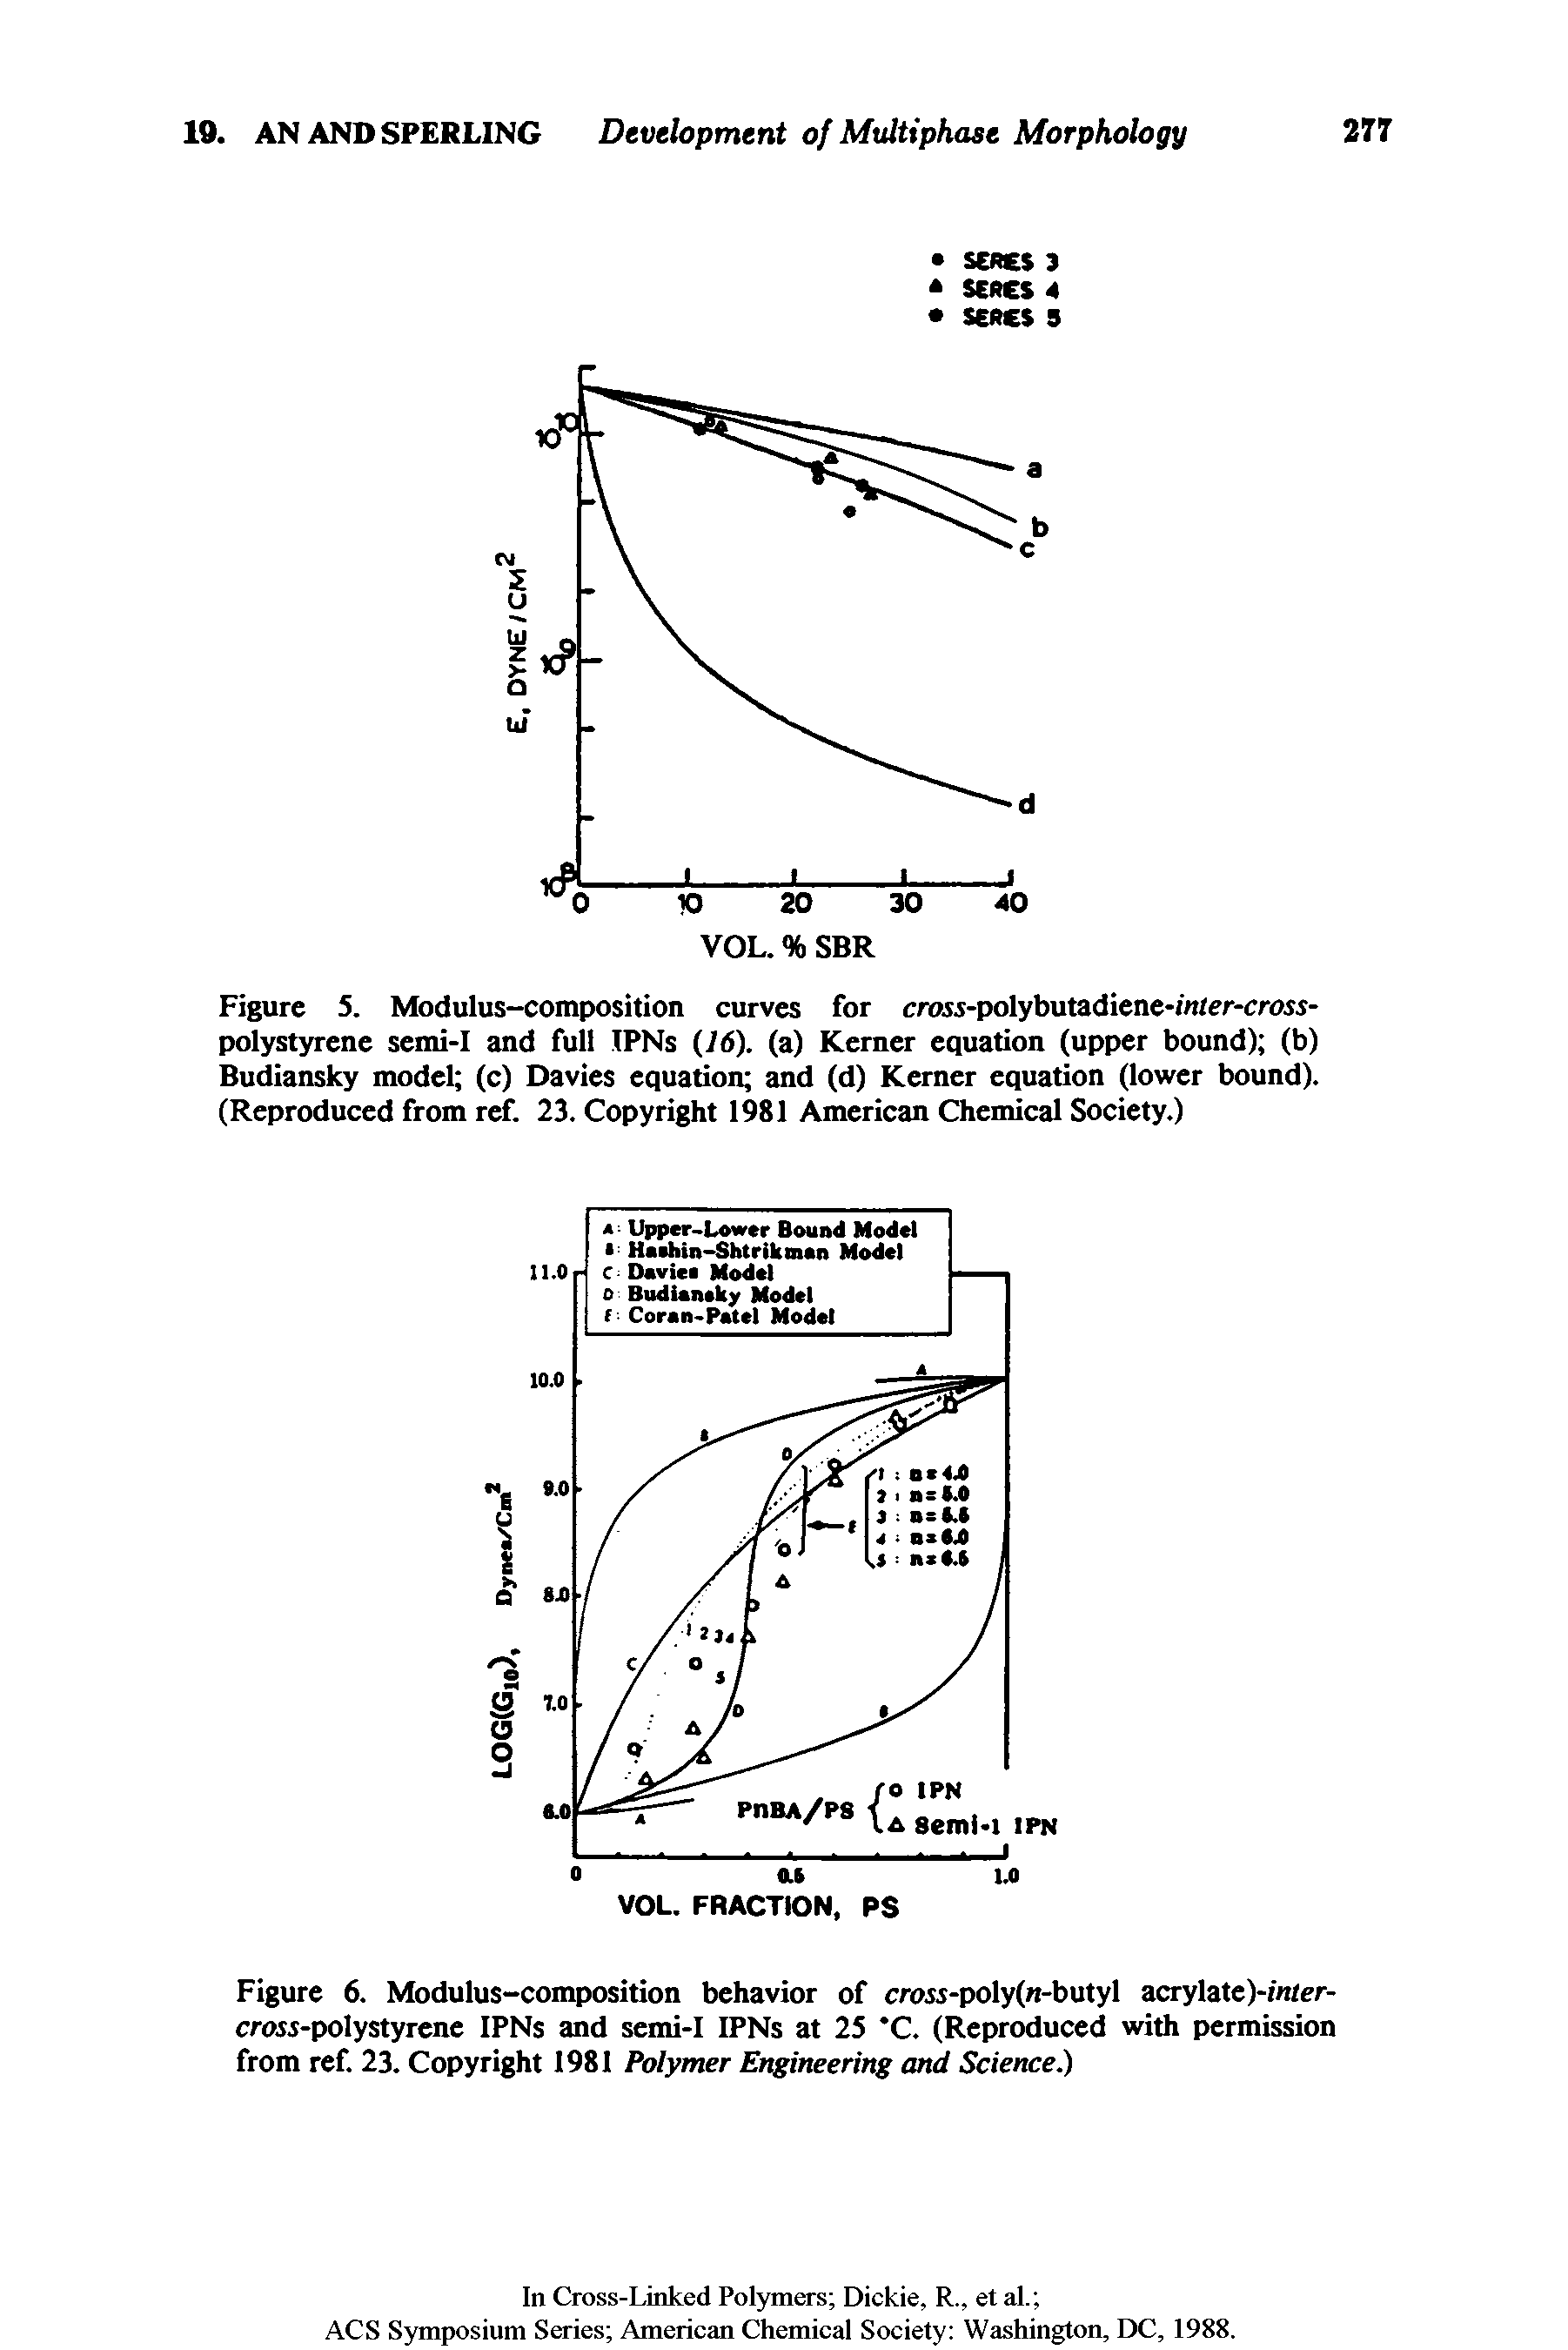 Figure 6. Modulus-composition behavior of cross-poly(n-butyl acrylate)-/ iter-cross-polystyrene IPNs and semi-I IPNs at 25 C. (Reproduced with permission from ref. 23. Copyright 1981 Polymer Engineering and Science.)...